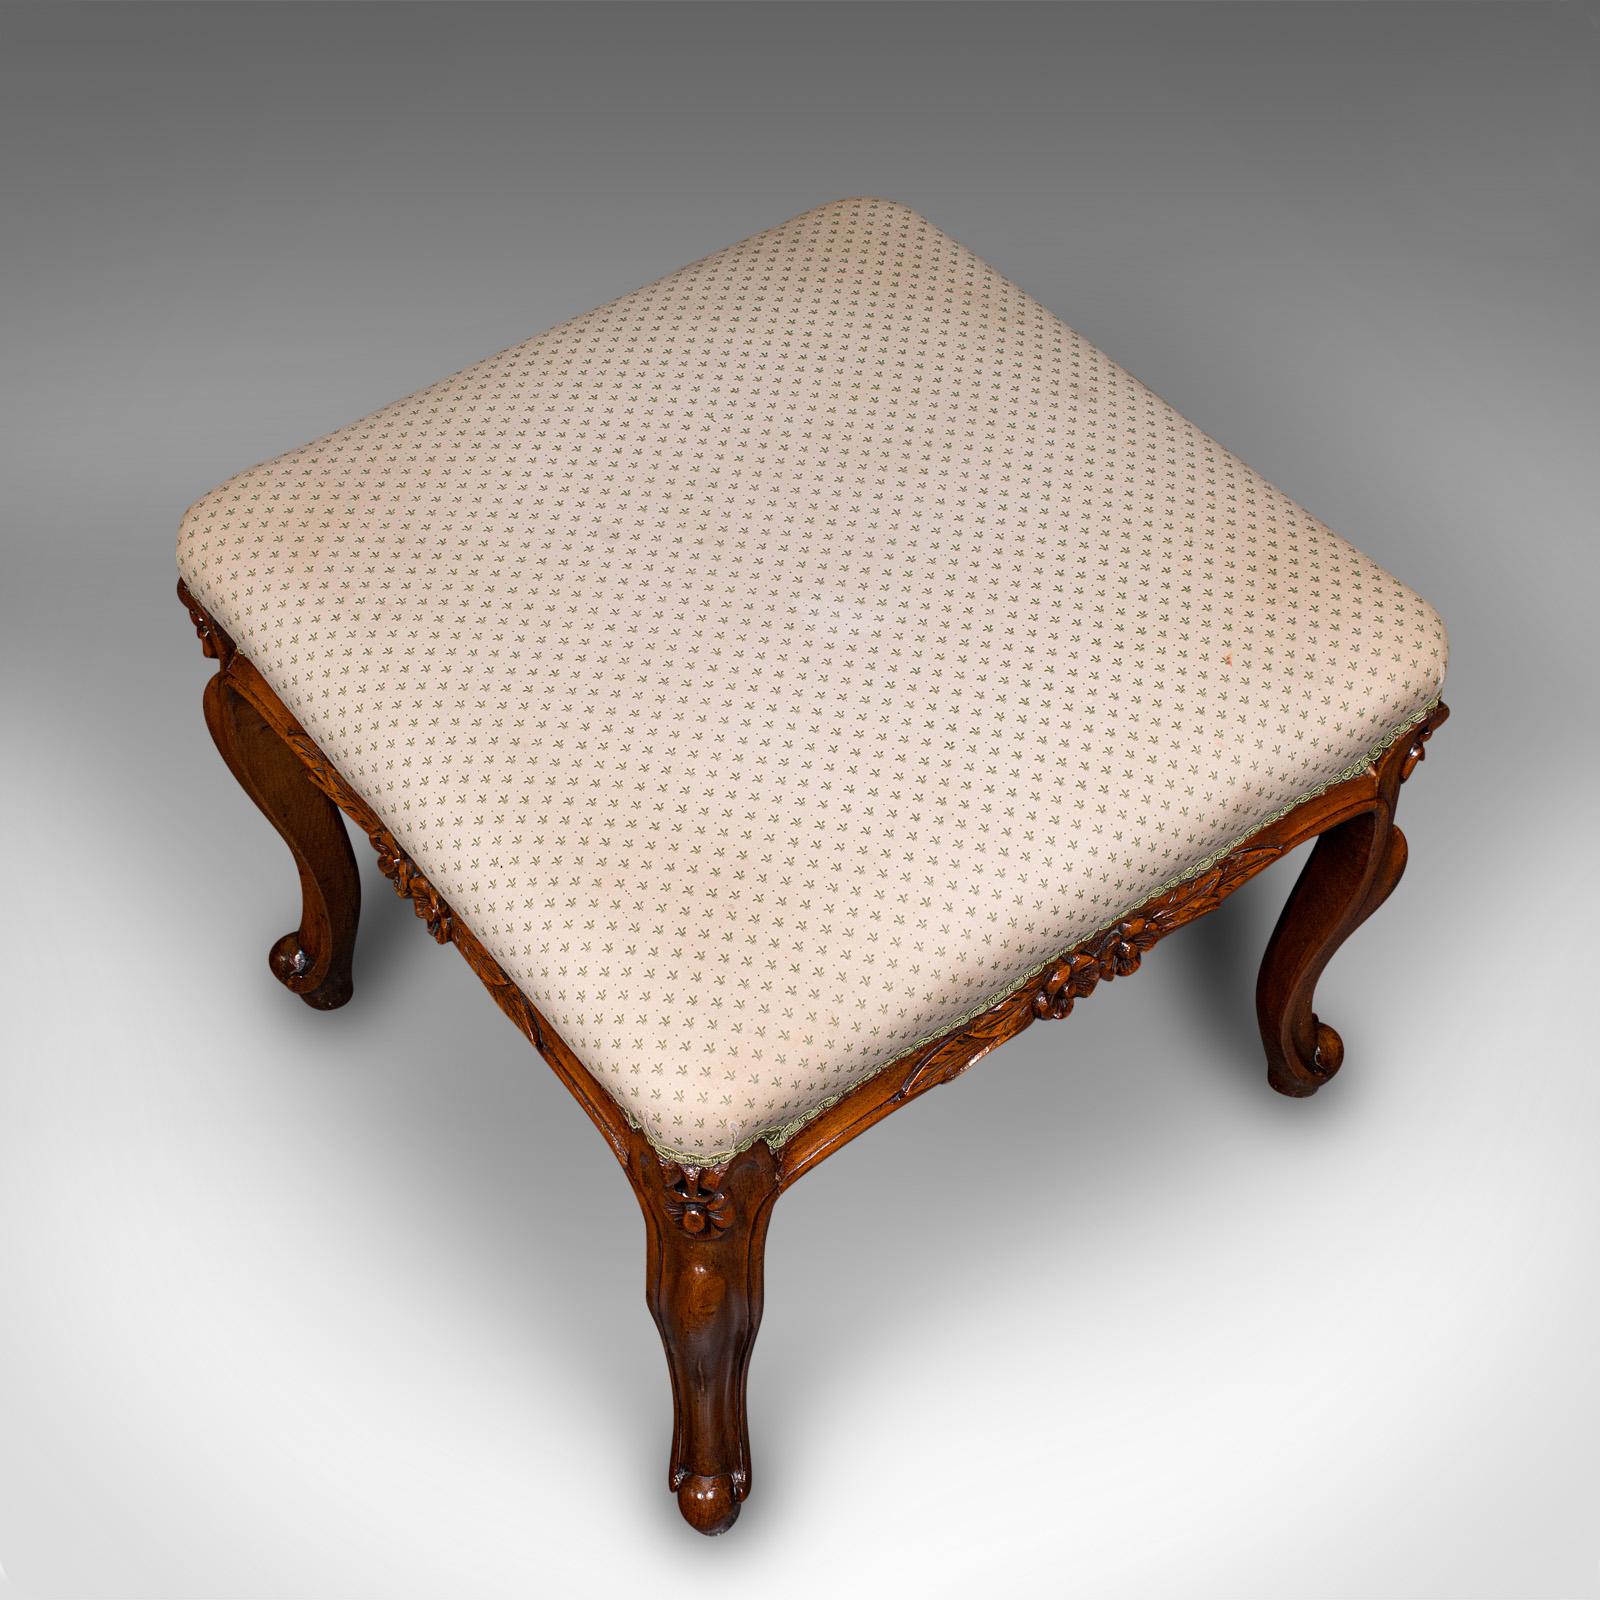 Wide Antique Dressing Stool, English, Walnut Bedroom Seat, Early Victorian, 1840 For Sale 1